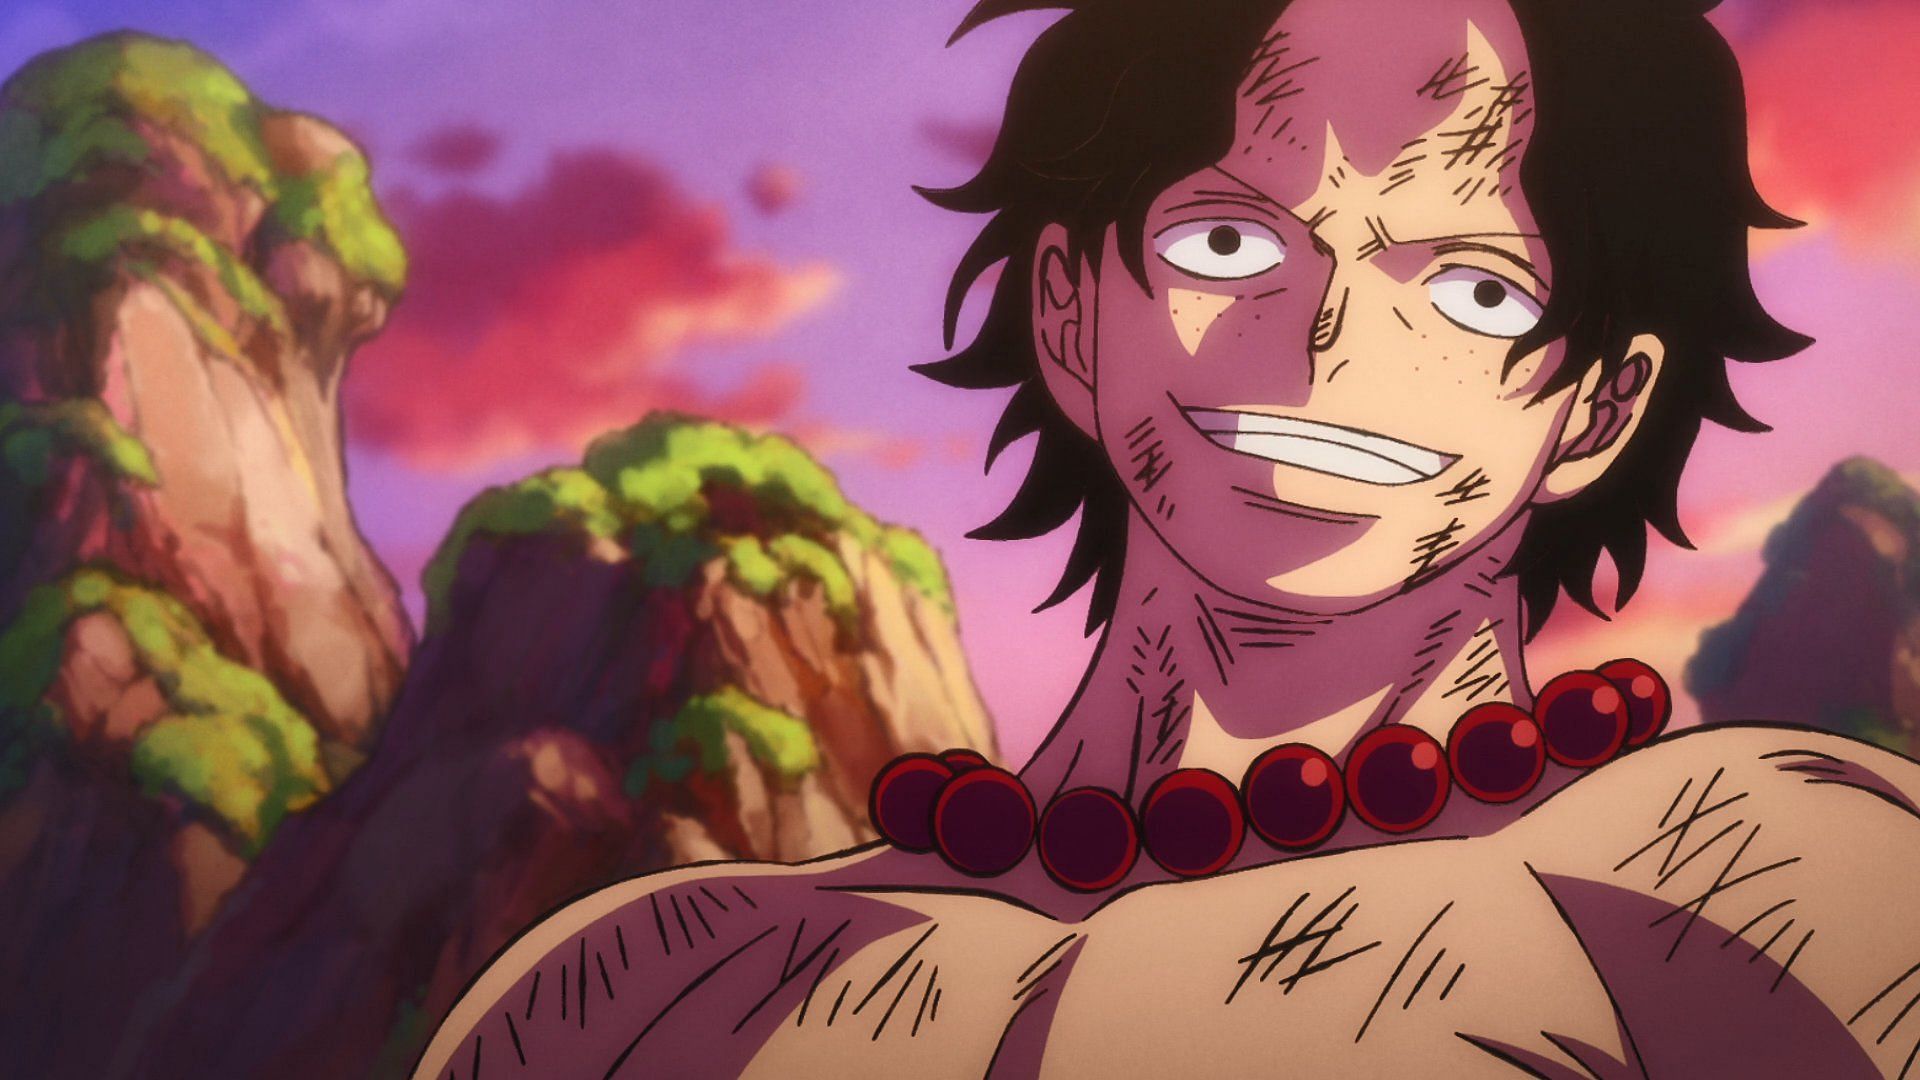 Ace as seen in One Piece (Image via Toei Animation)